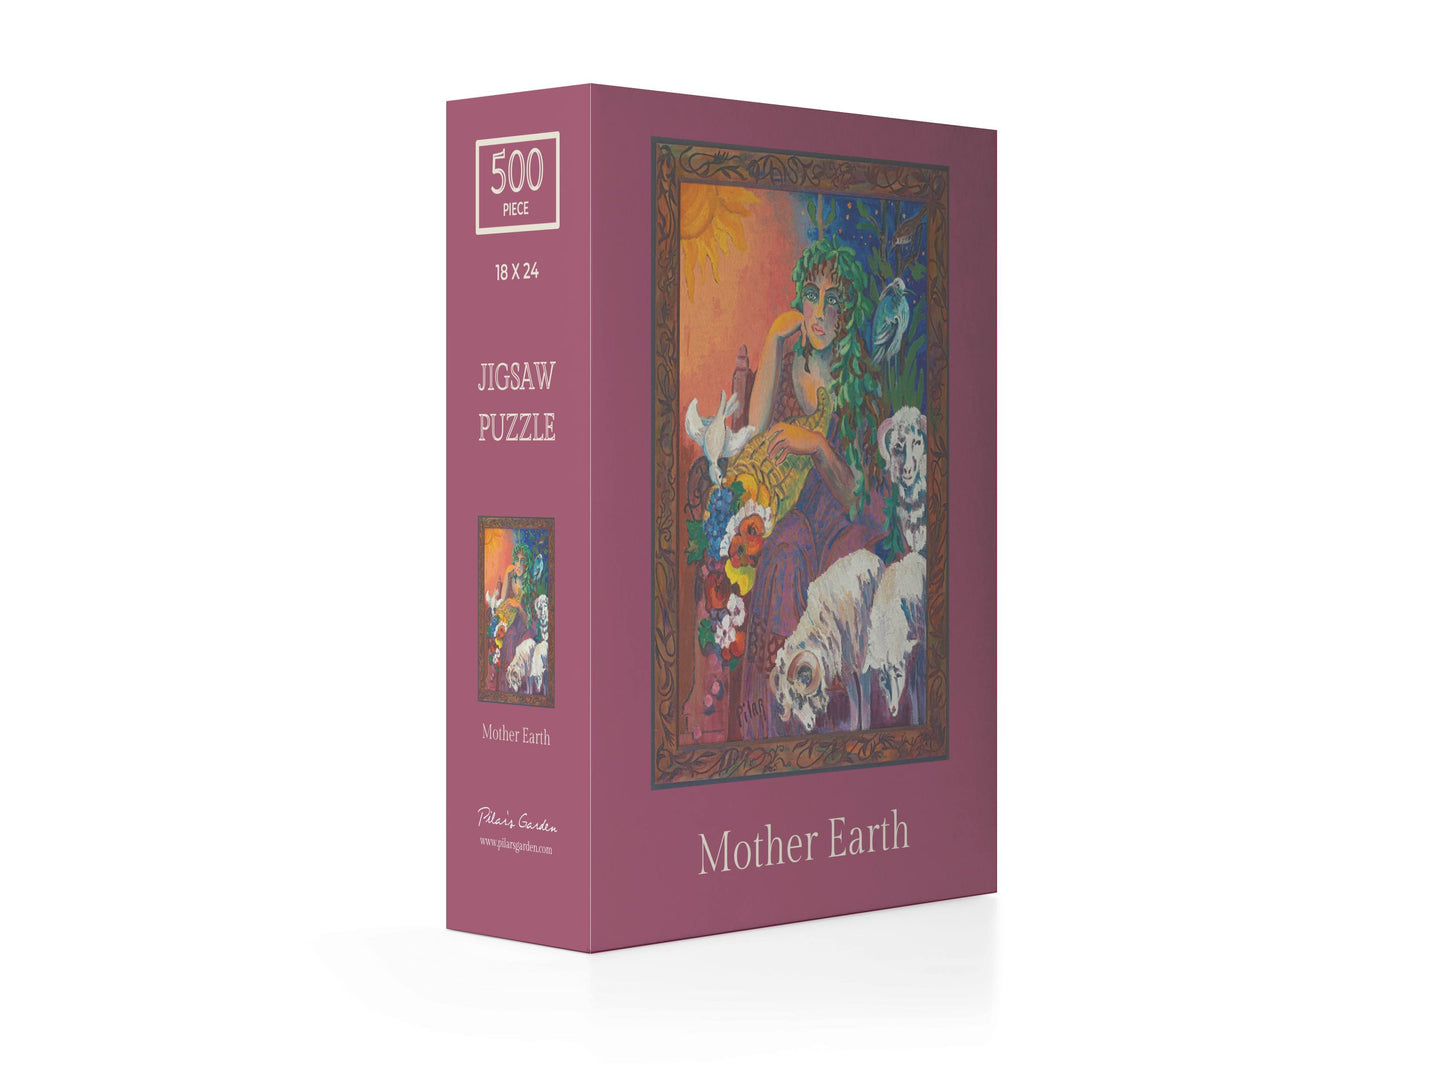 Jigsaw Puzzle, "Mother Earth"